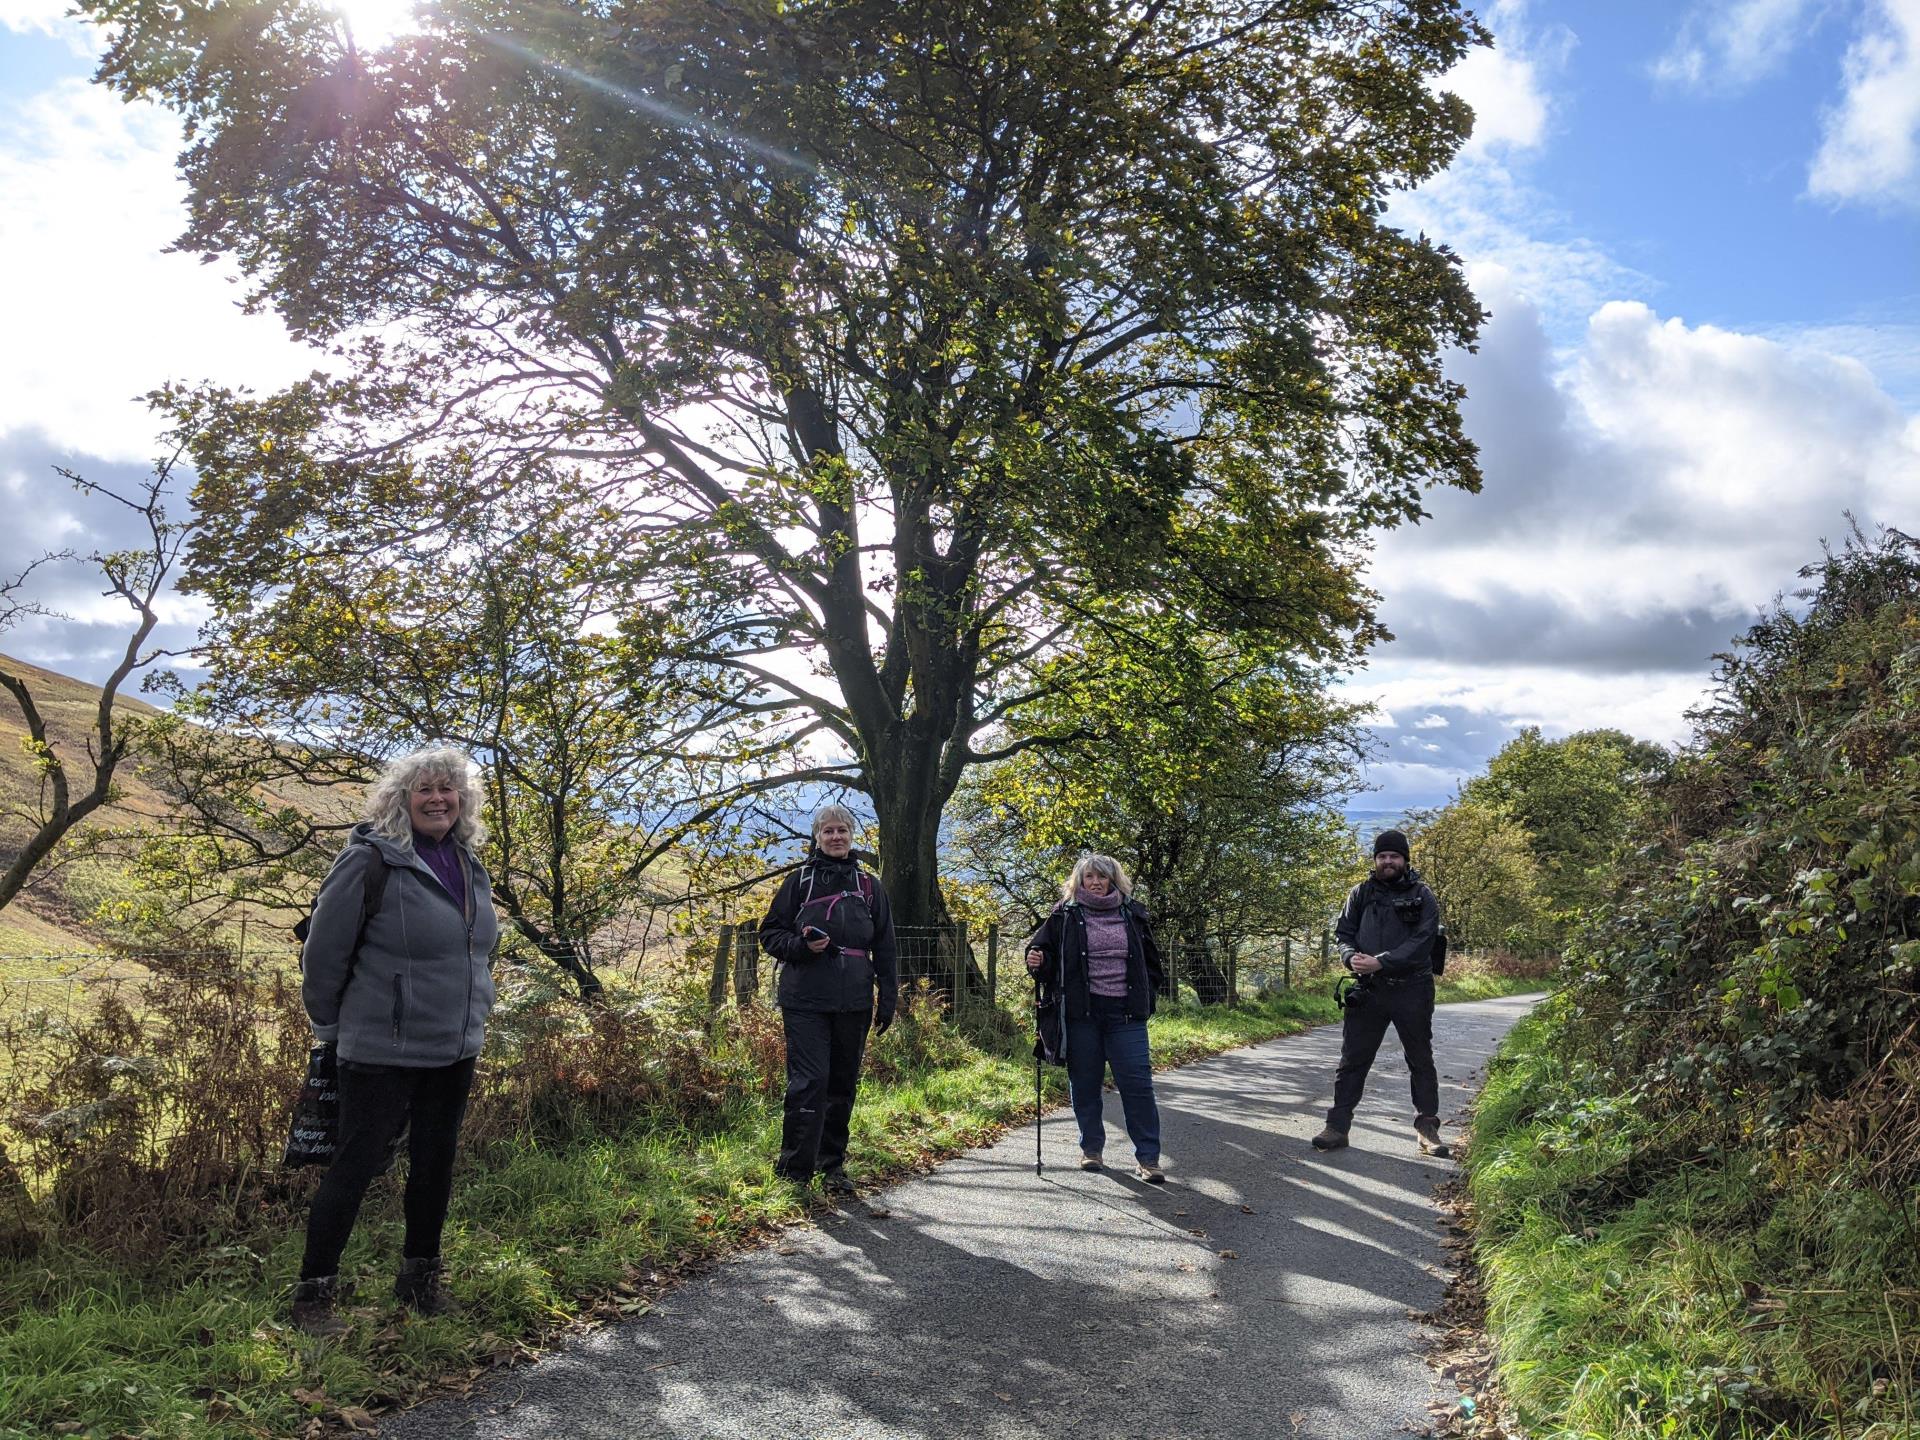 Guided walking holidays for everyone